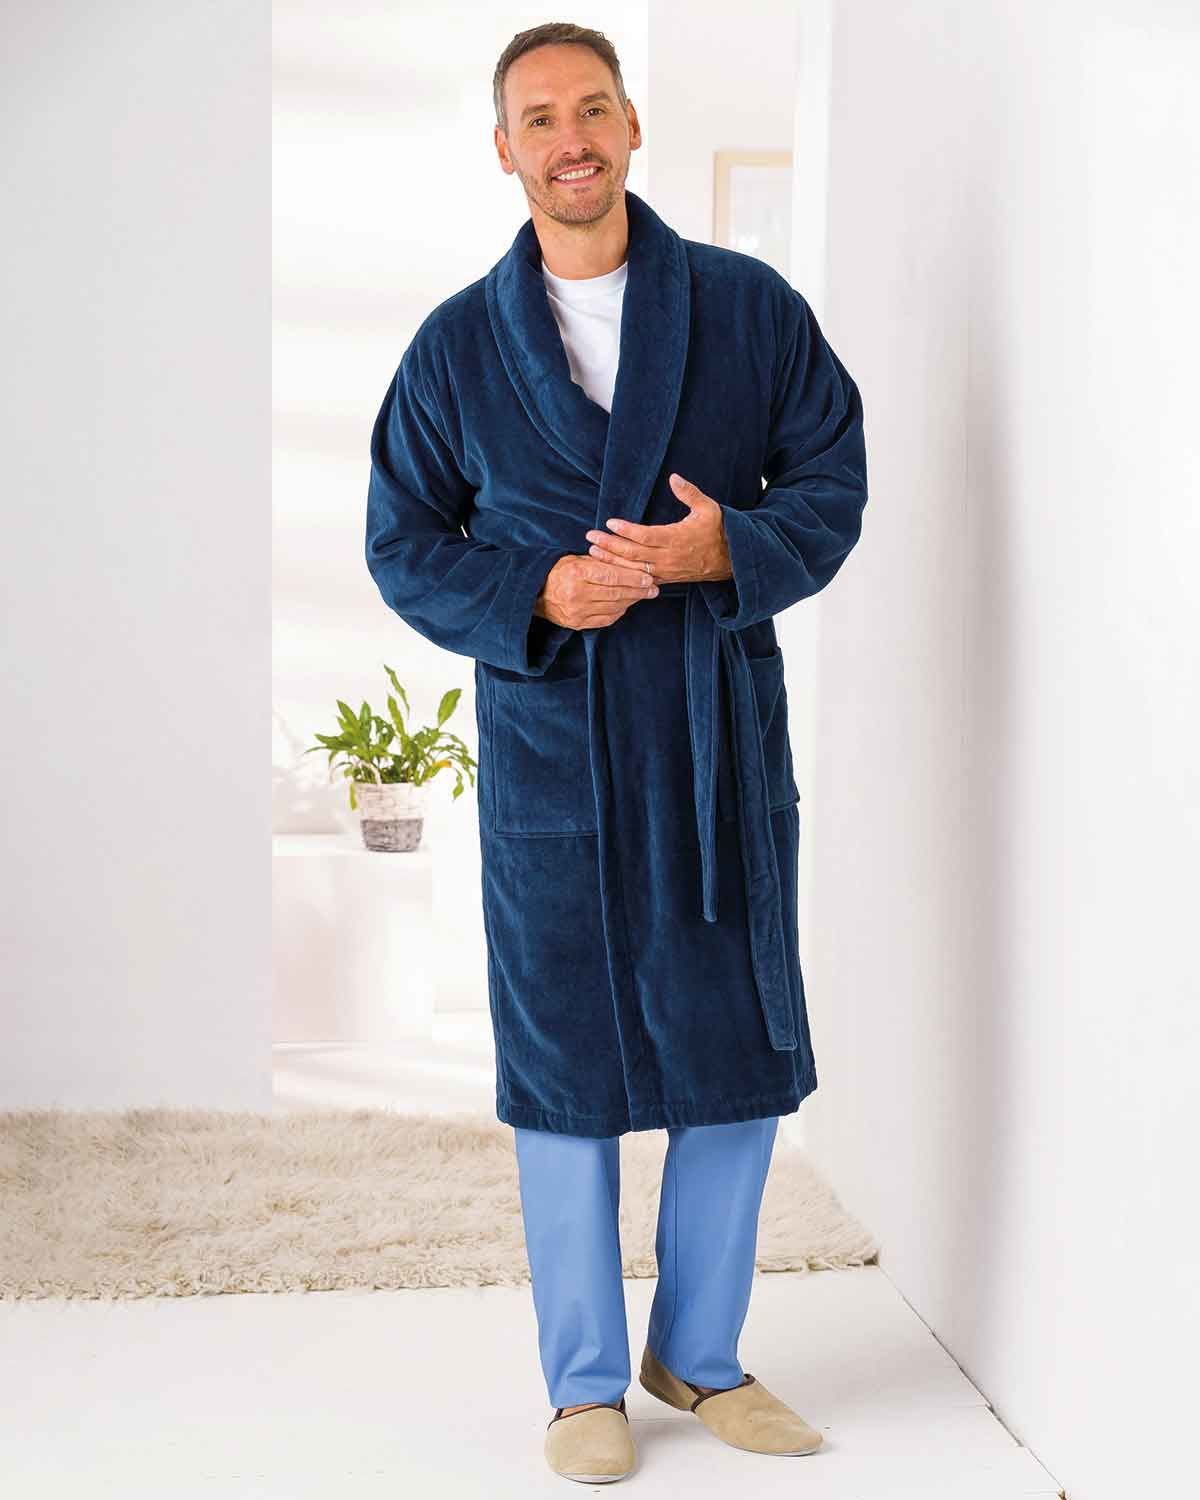 Men :: Robes :: Waffle Robes :: Waffle Kimono Navy Blue Long Robe Square  Pattern - Wholesale bathrobes, Spa robes, Kids robes, Cotton robes, Spa  Slippers, Wholesale Towels